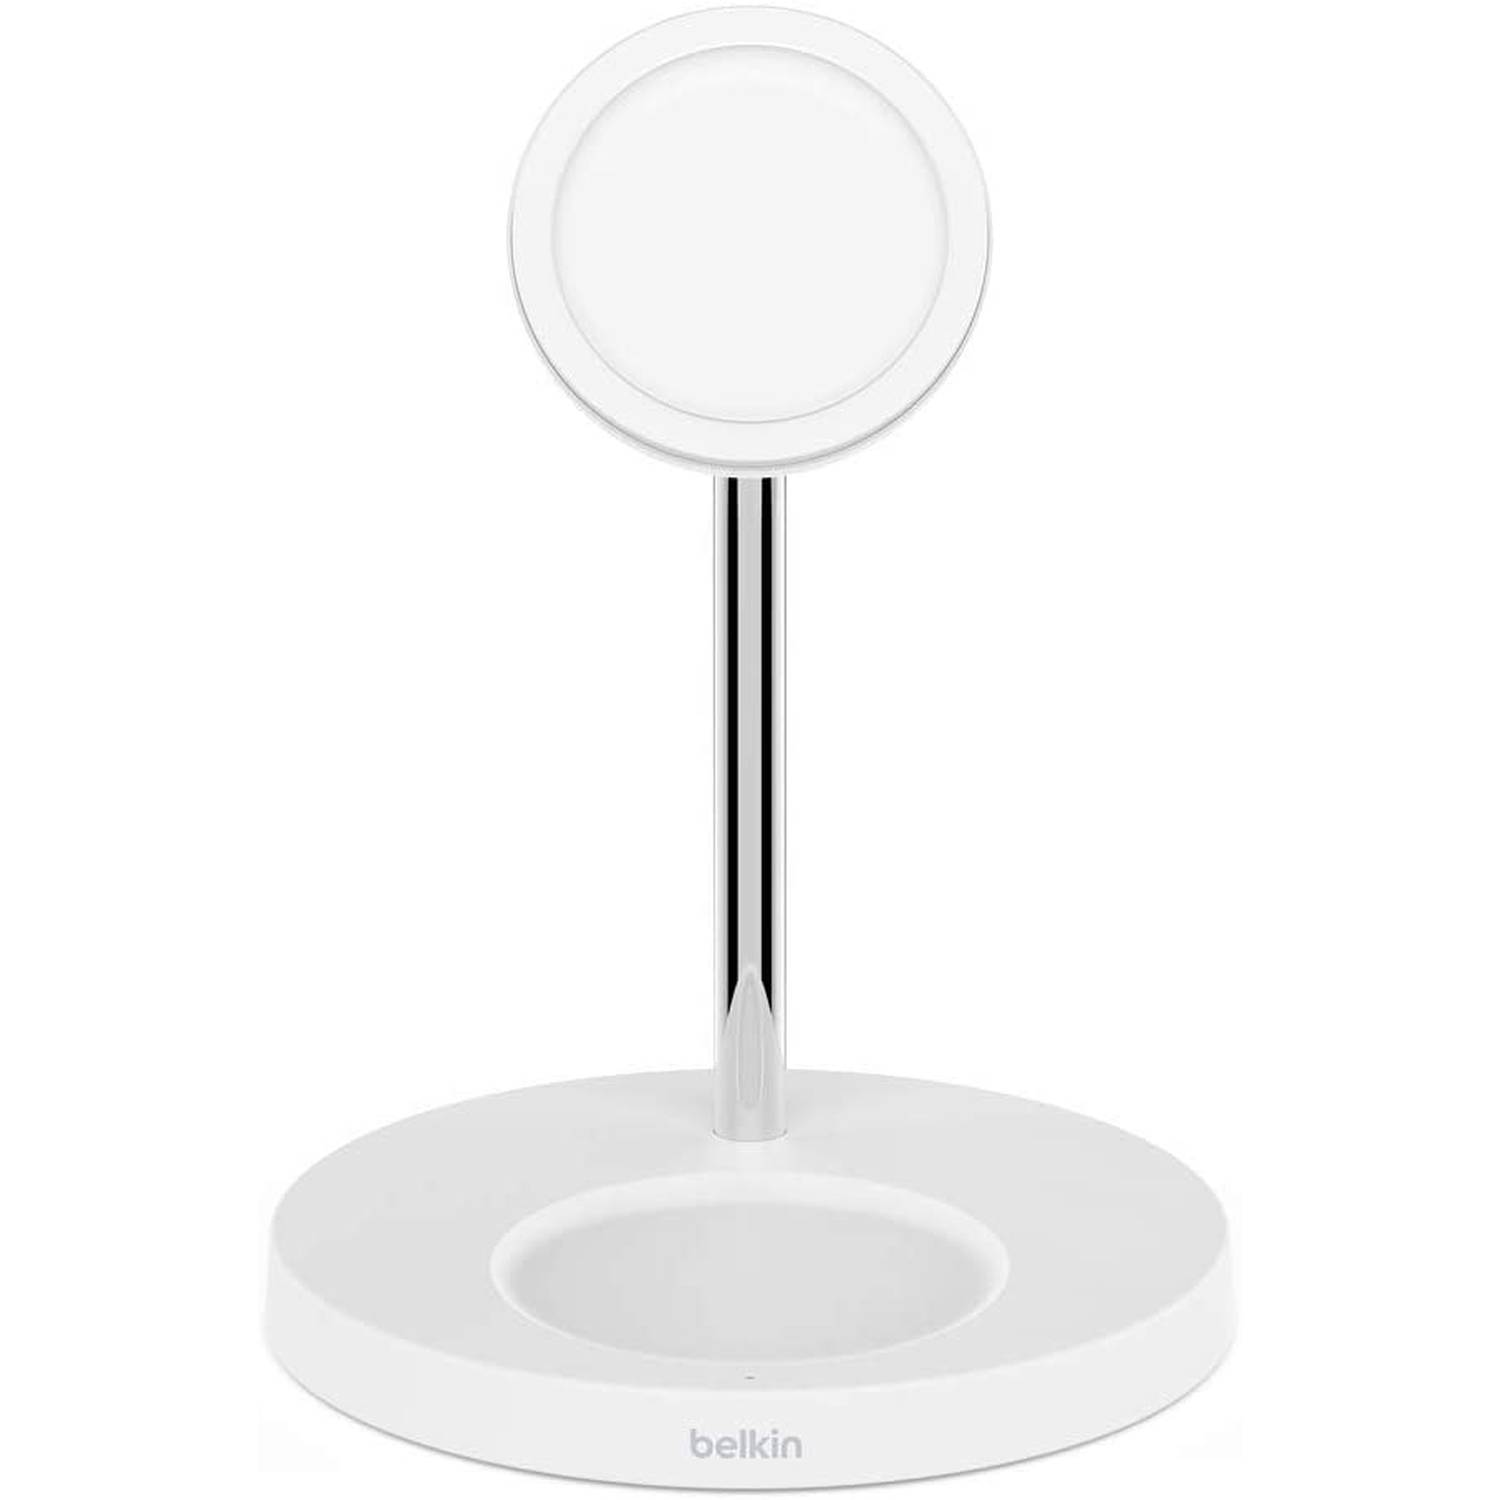 Belkin WIZ010myWH 2-in-1 Wireless Charger Stand - MagSafe 15W